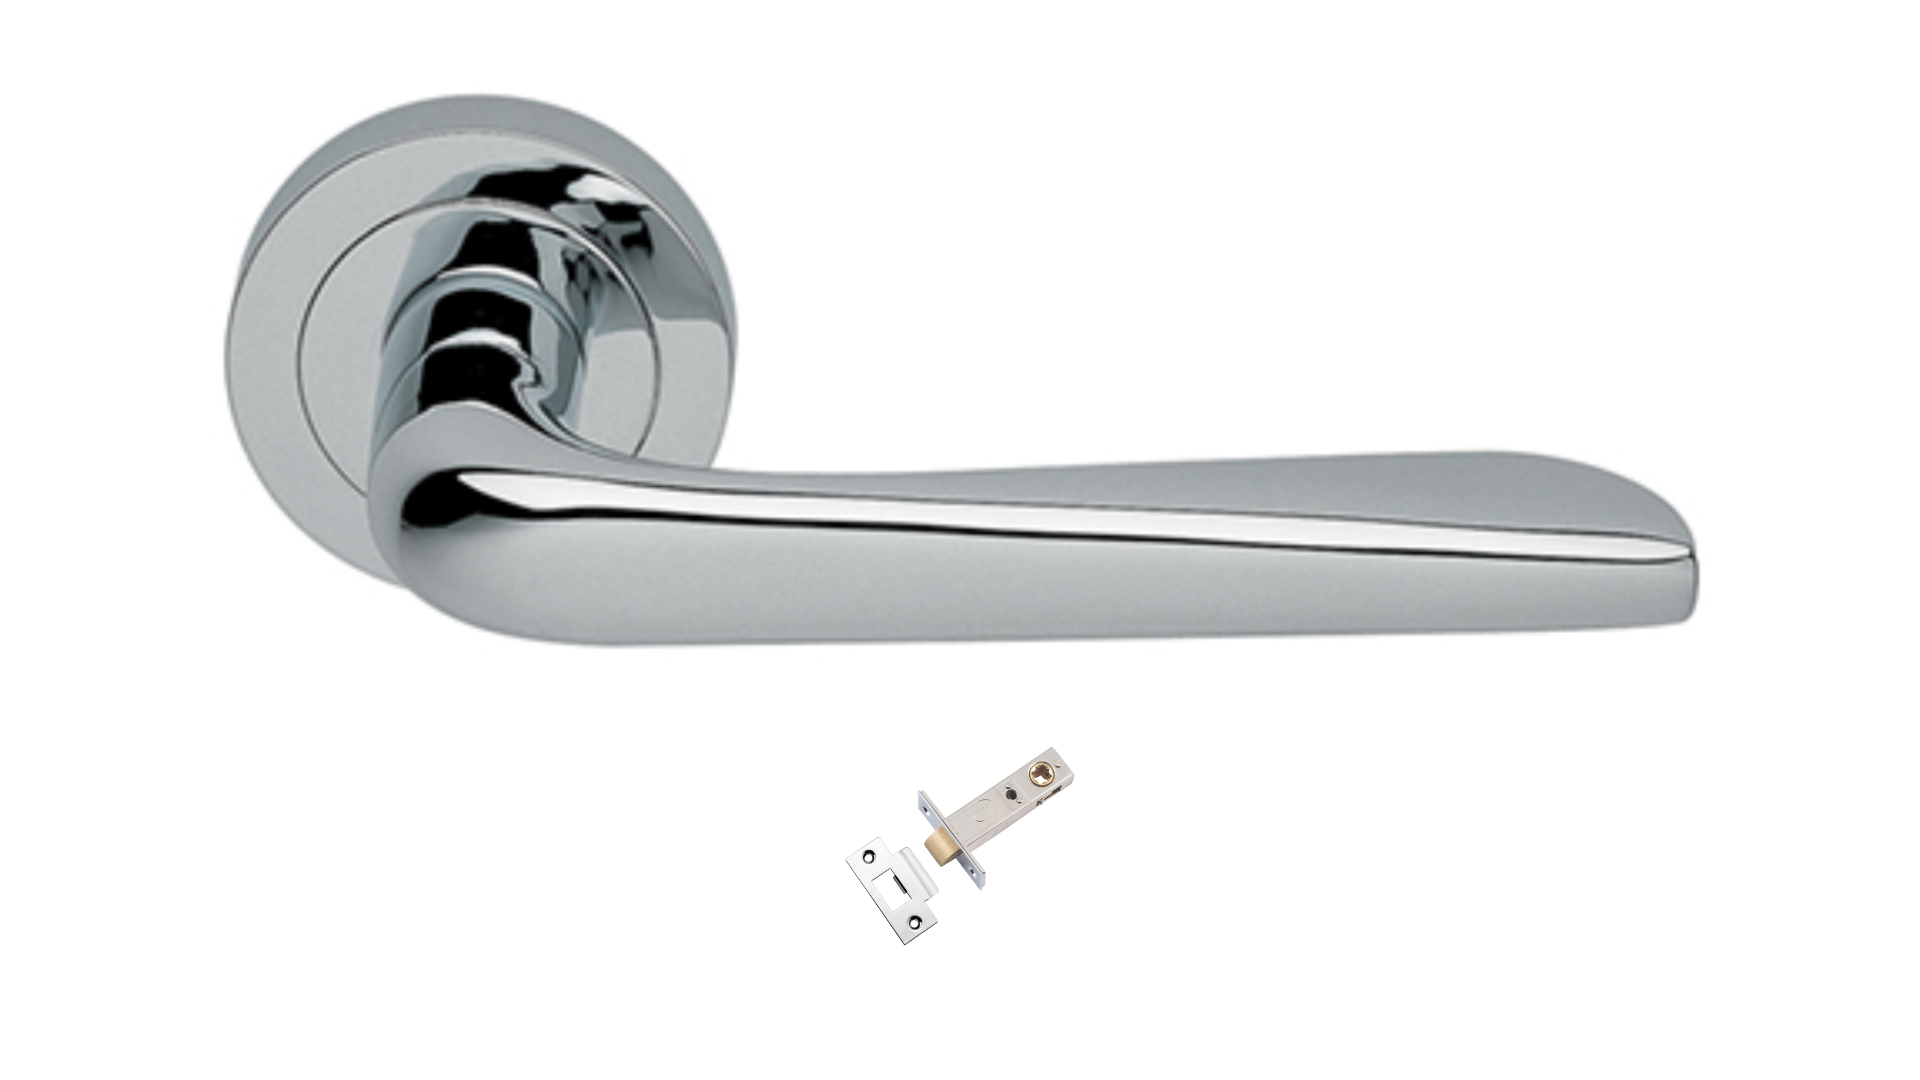 Product picture of the Petra Polished Chrome Door Handle with separate privacy tubular latch on a white background.